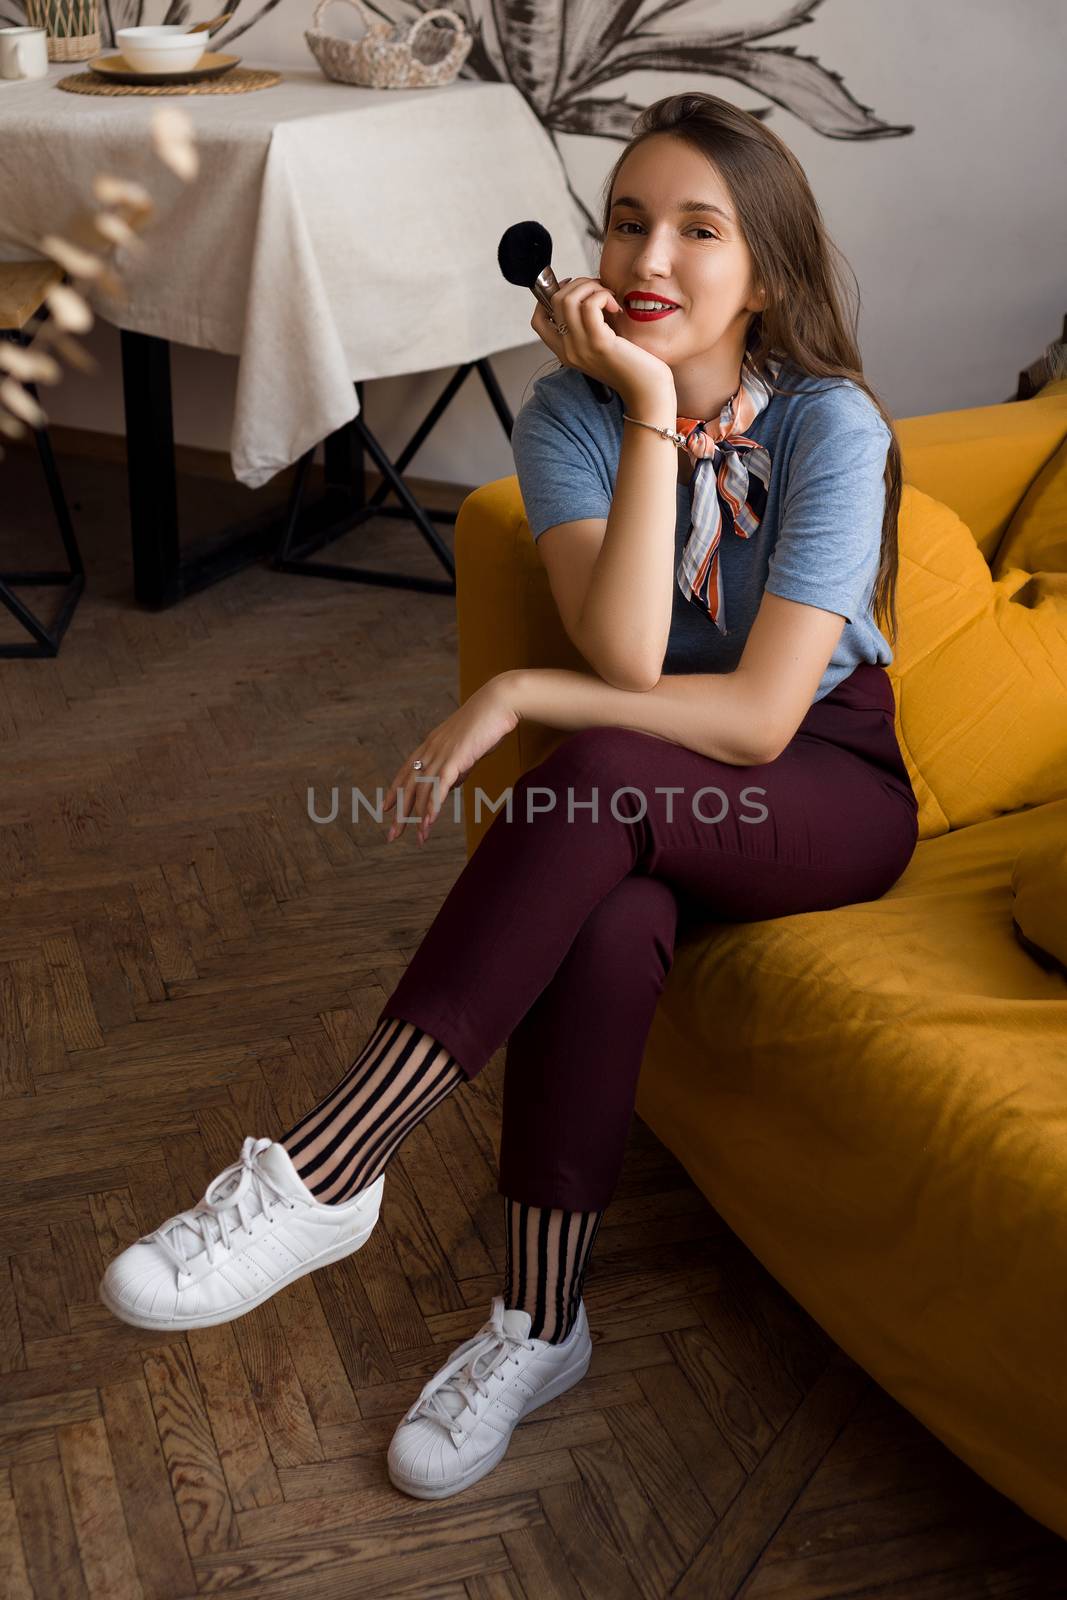 Make-up artist with brushes sitting on the couch in cozy interior